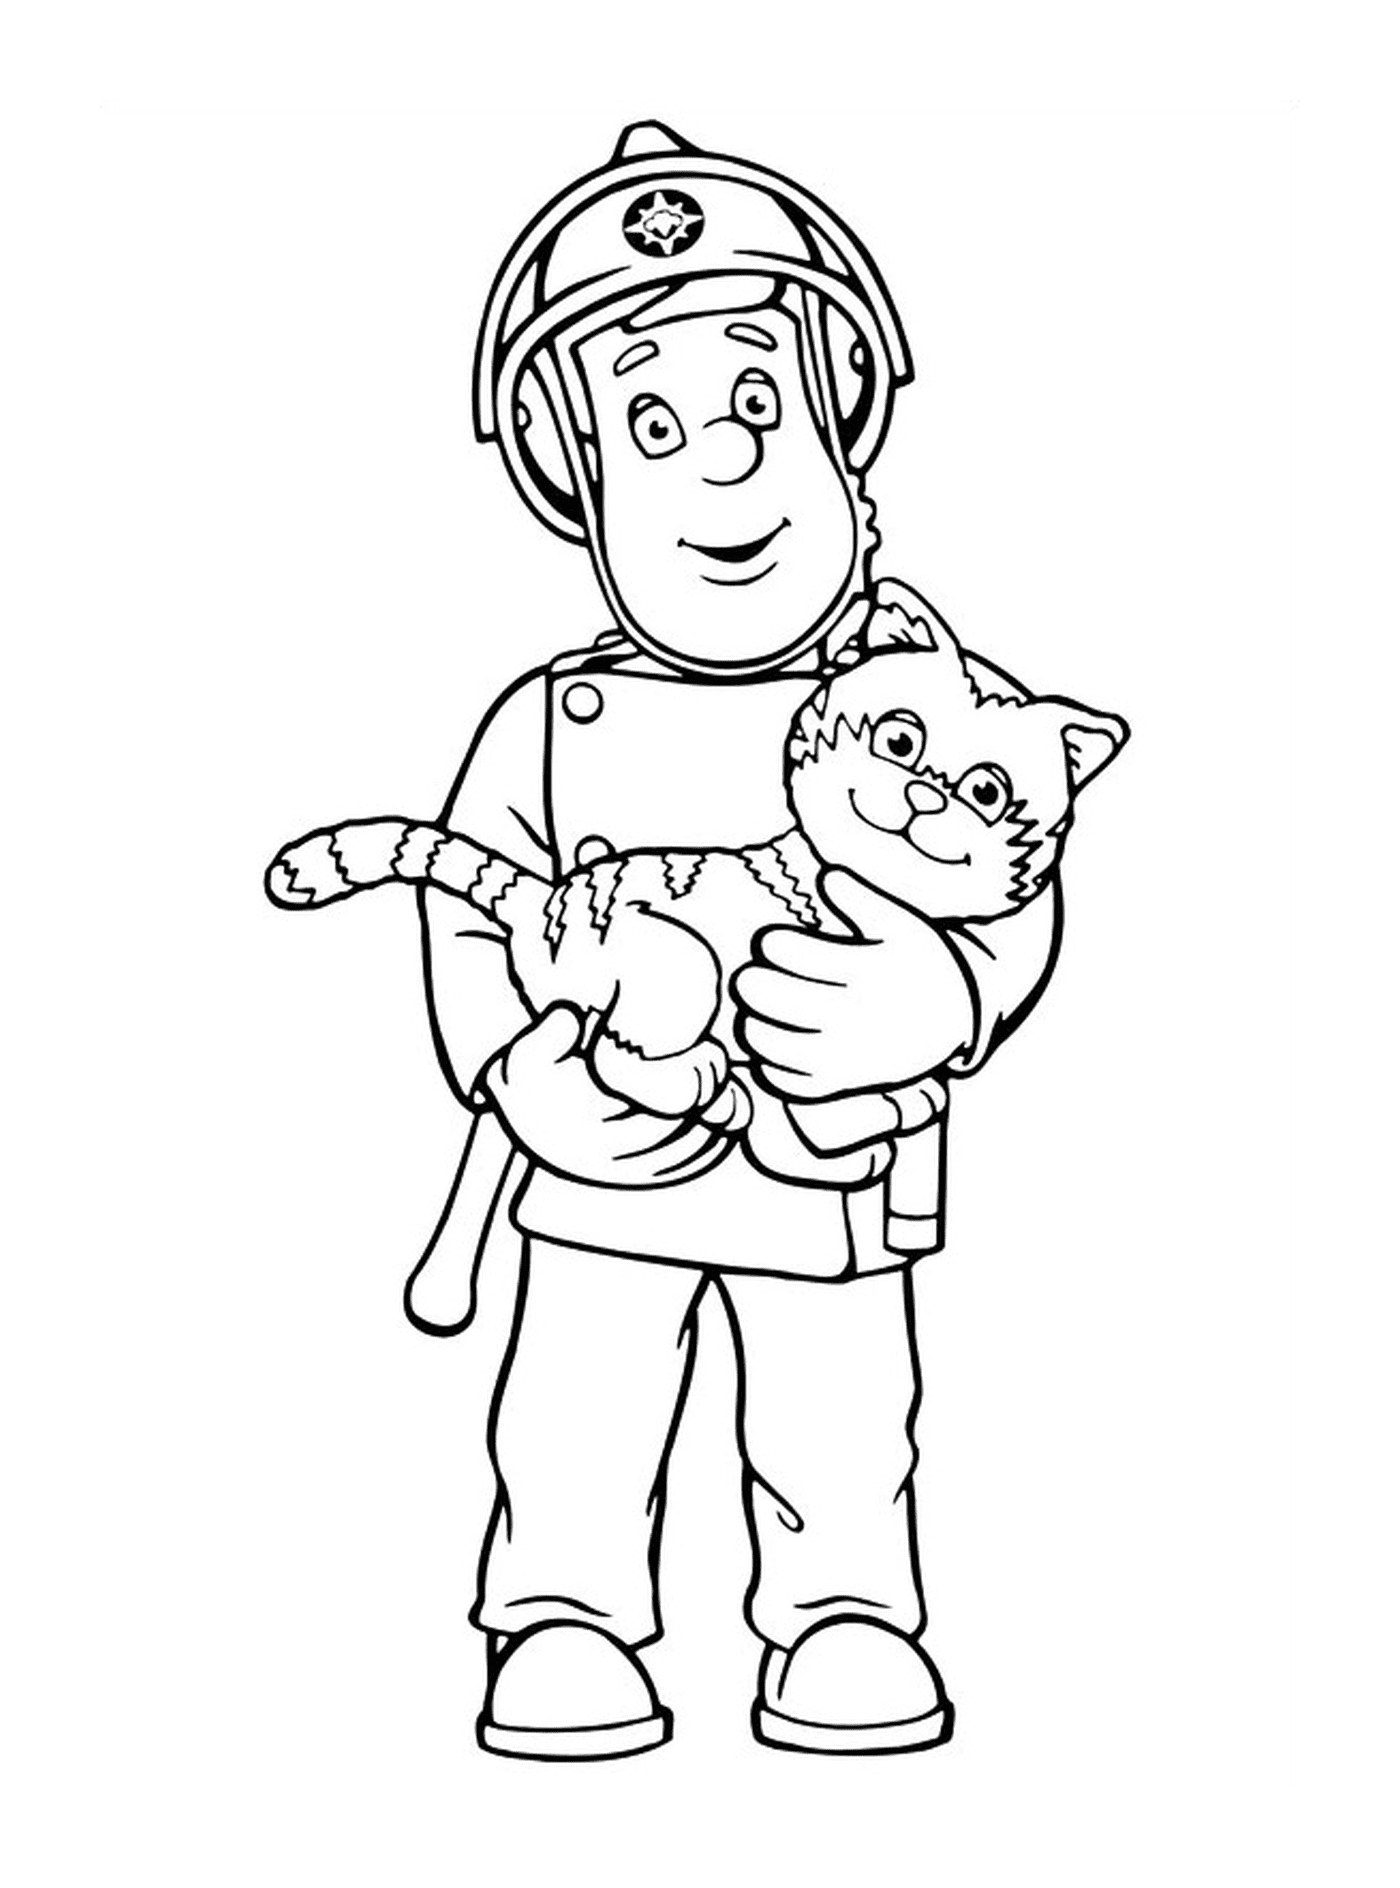  Man holding a cat in his arms 